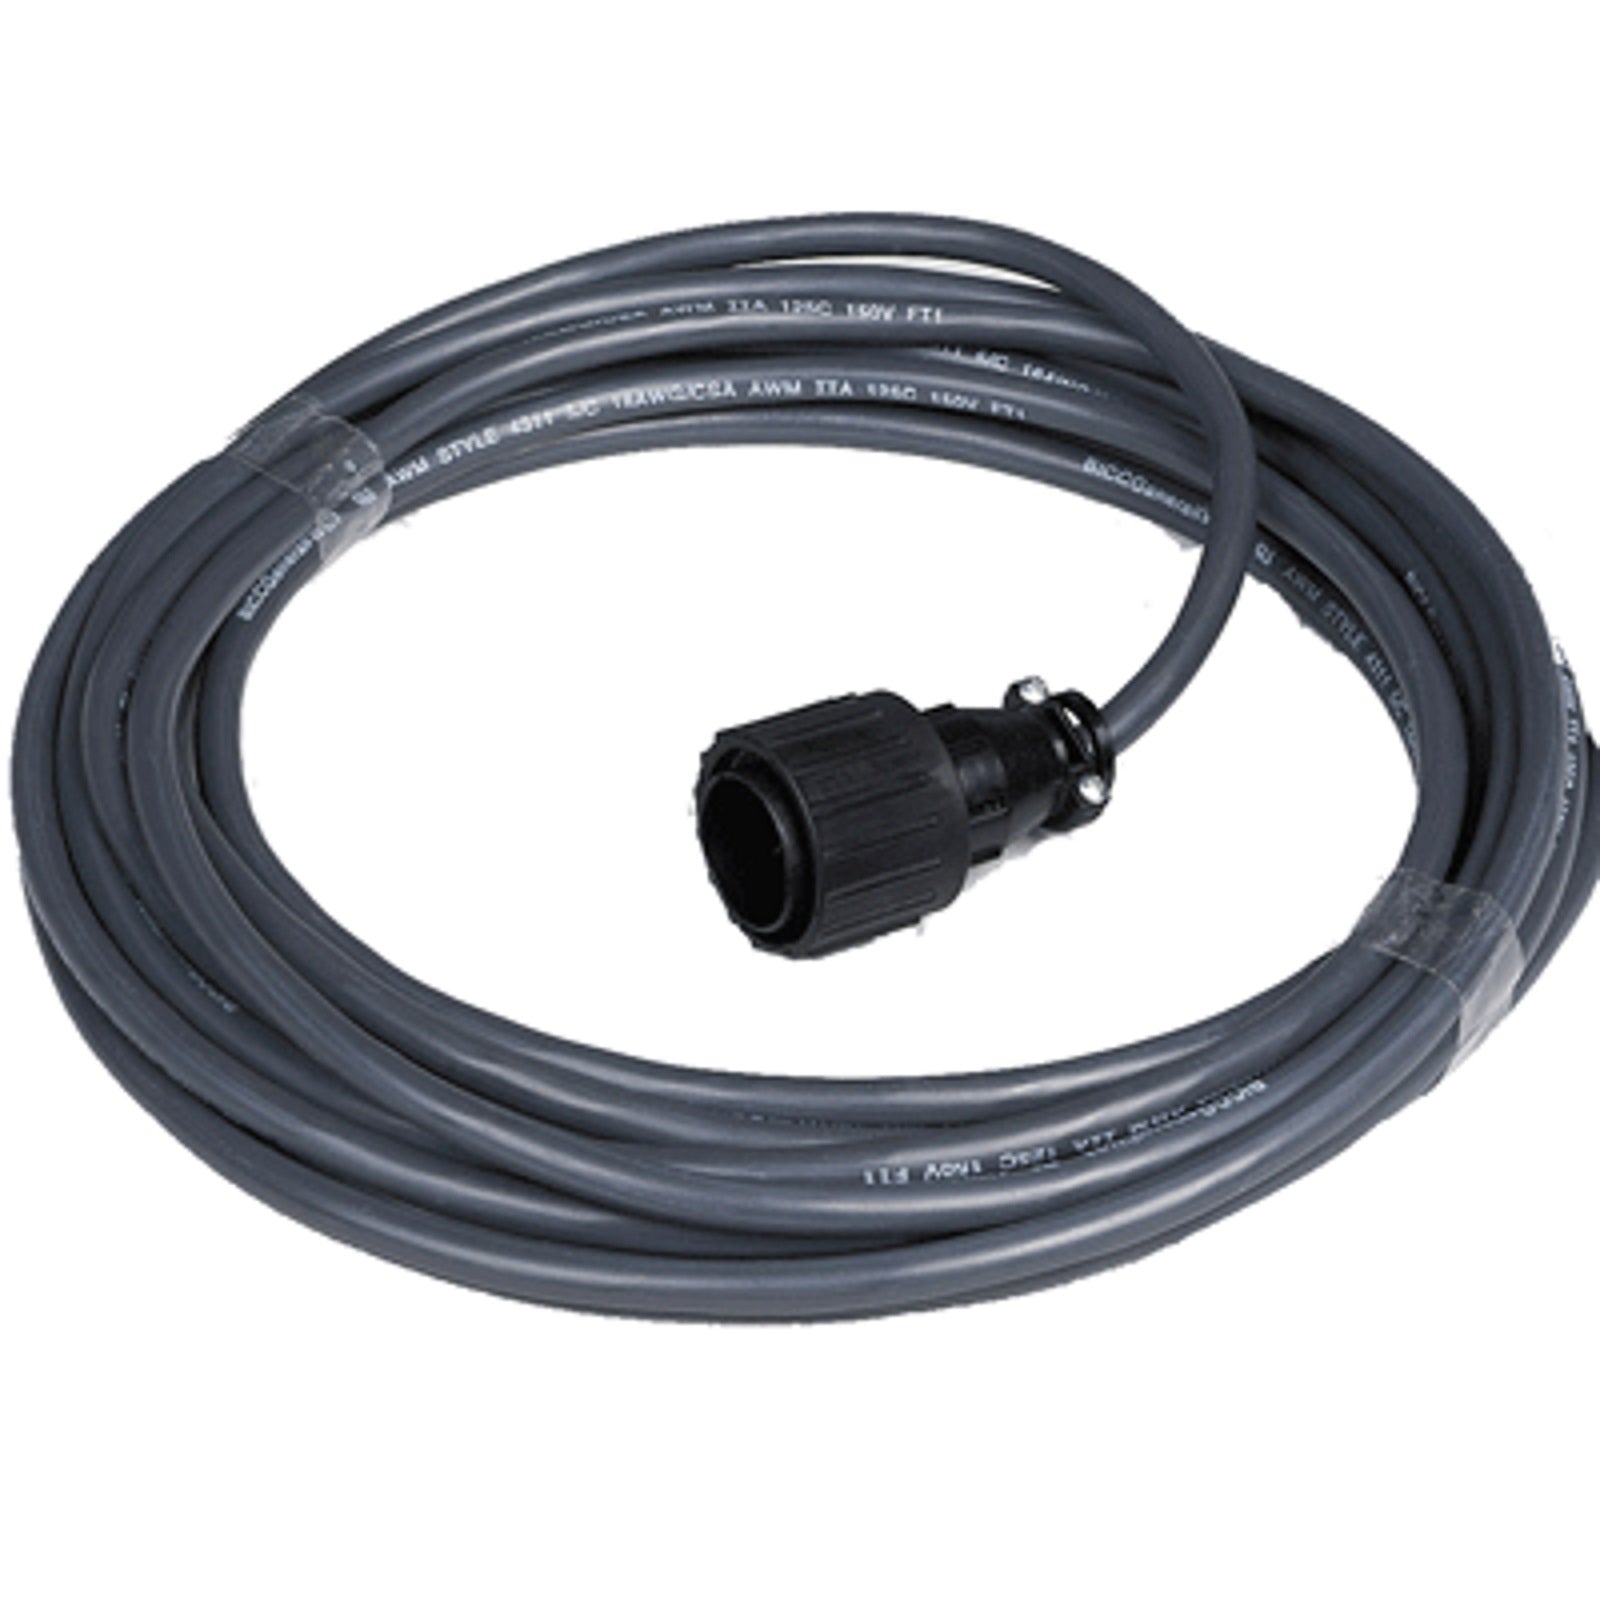 Miller 25' 14 Pin 24 VAC Extension Cable (242208025)